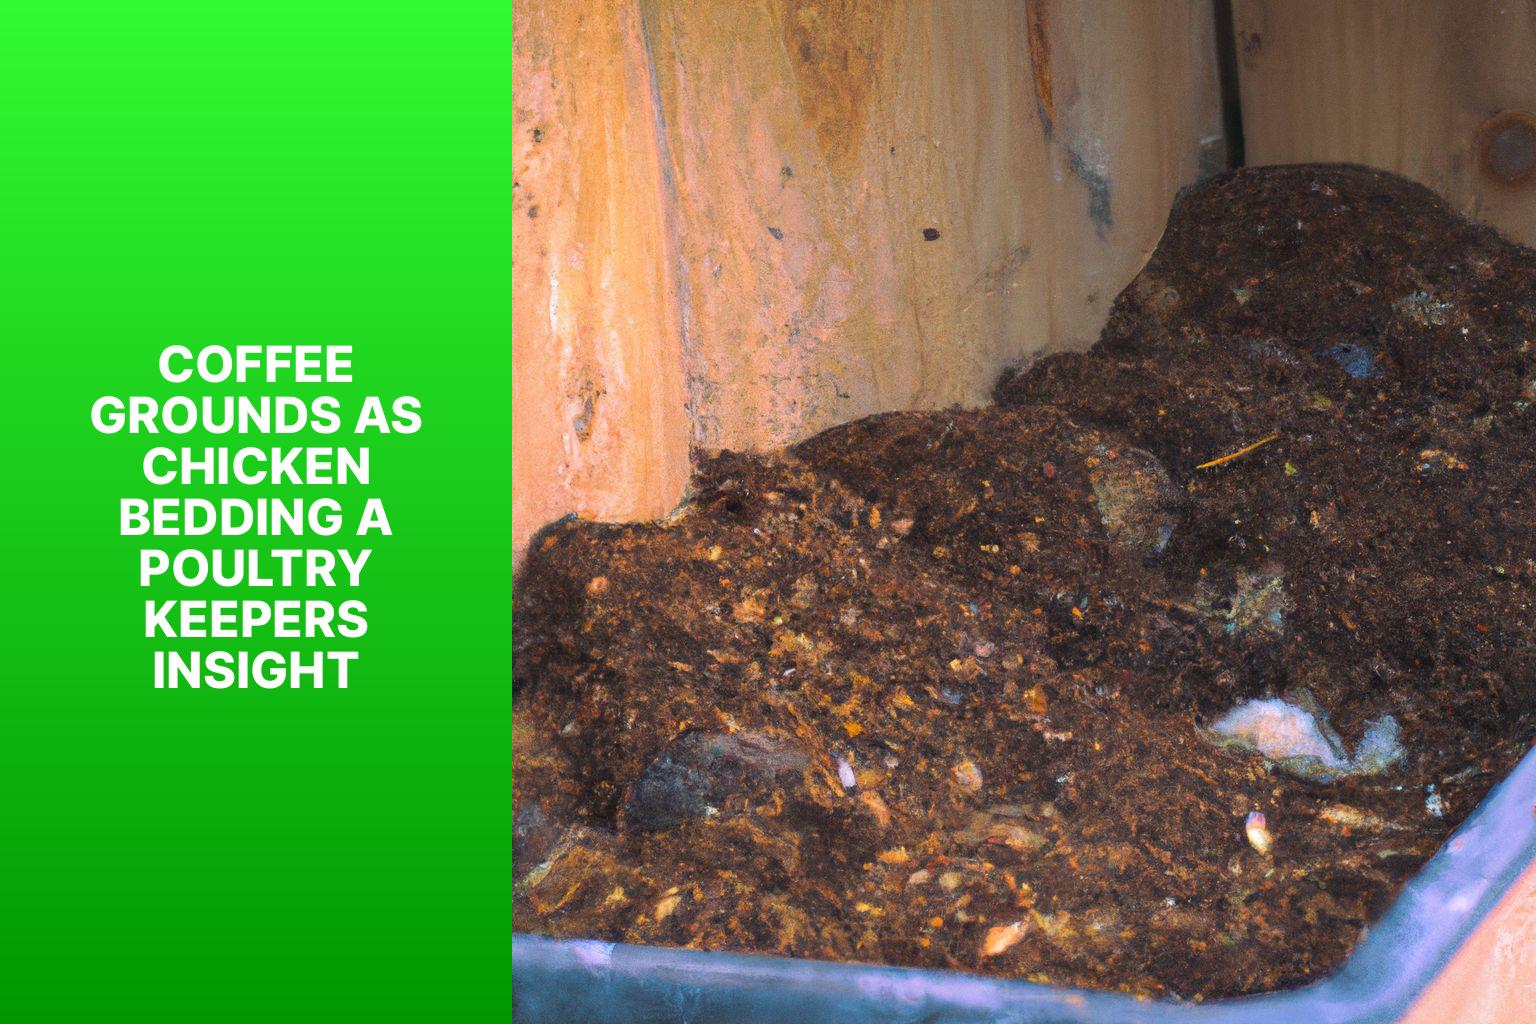 Coffee Grounds as Chicken Bedding: A Poultry Keeper’s Insight